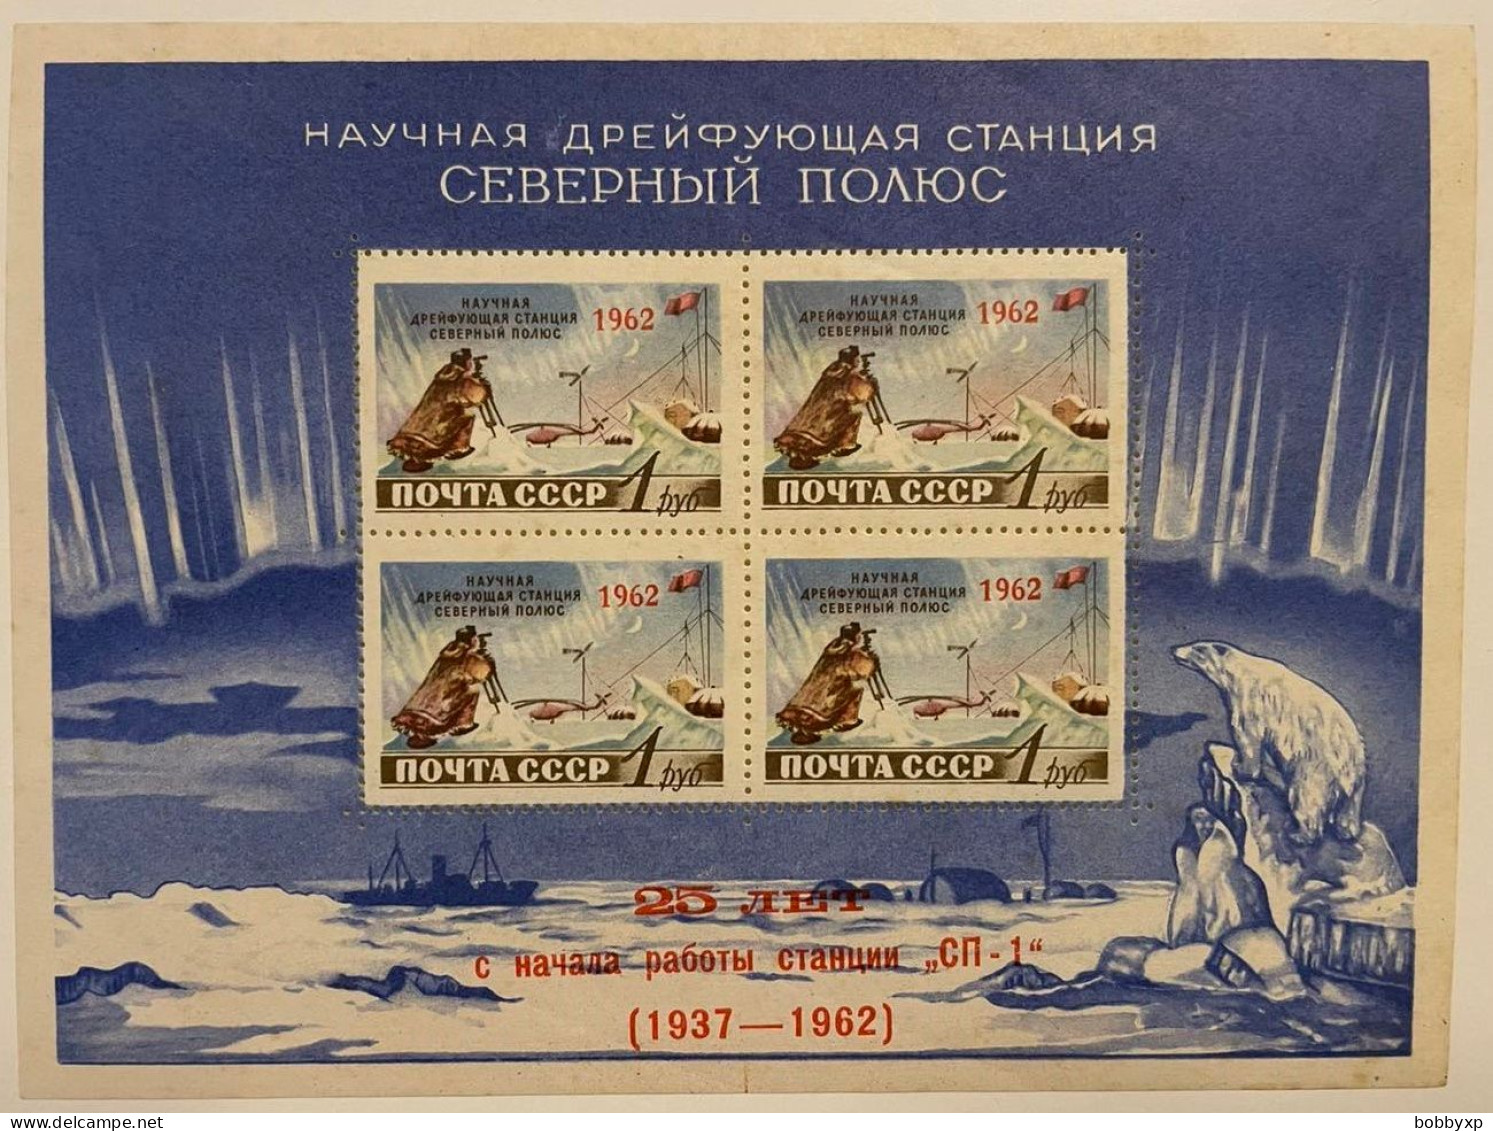 Russia. USSR 1962. Full Yearsets 148 Stamps & 3 Souvenir Sheet. MNH - Años Completos